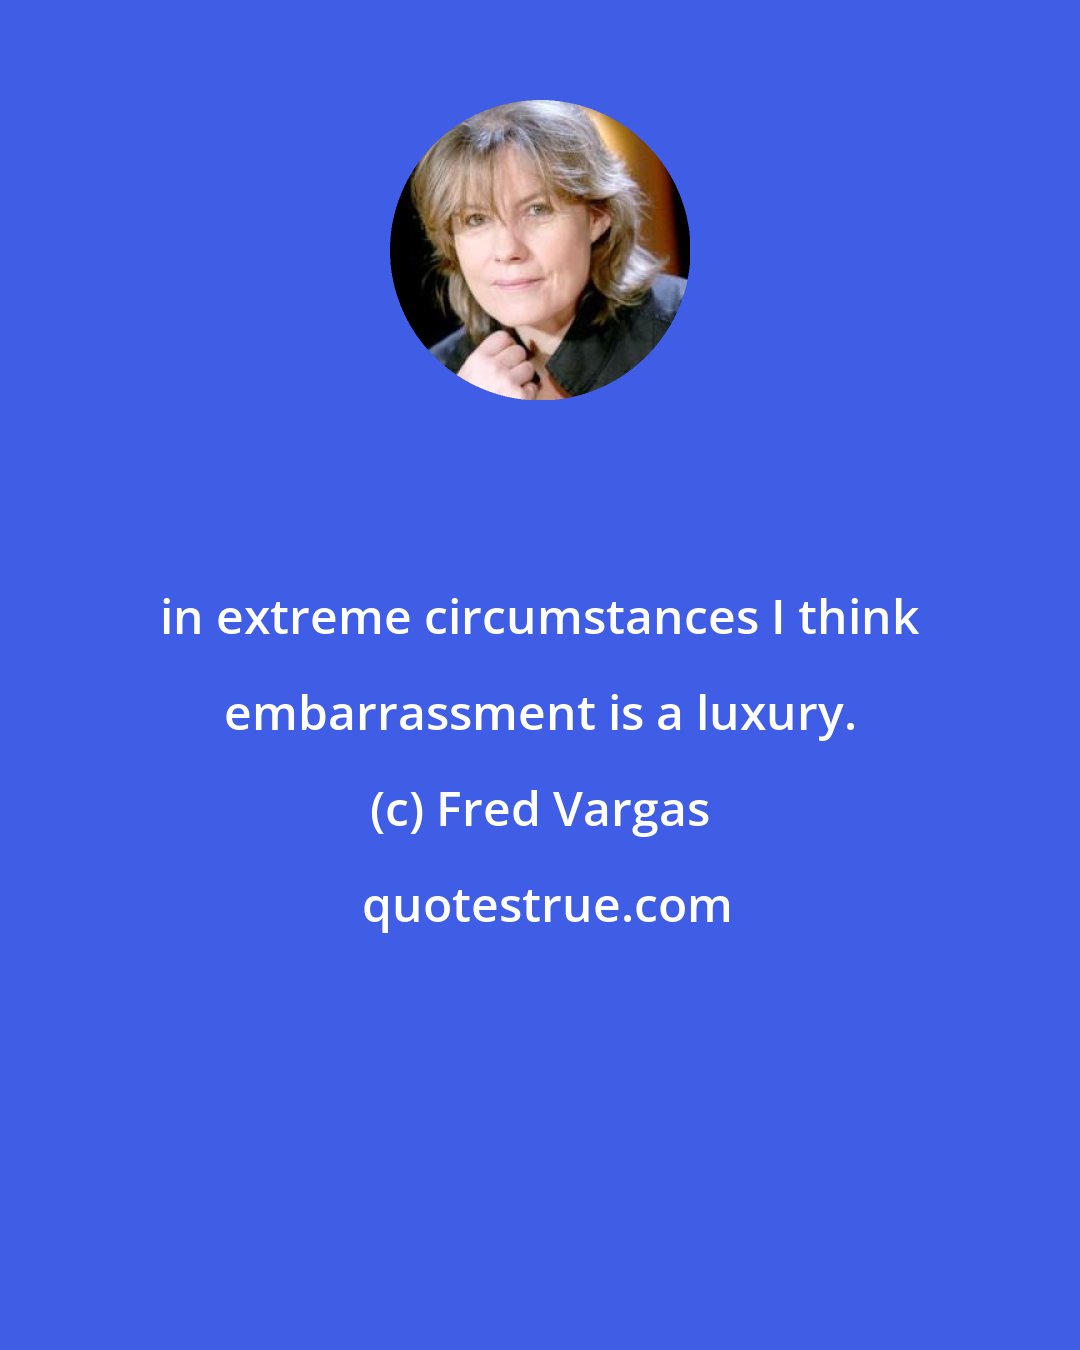 Fred Vargas: in extreme circumstances I think embarrassment is a luxury.